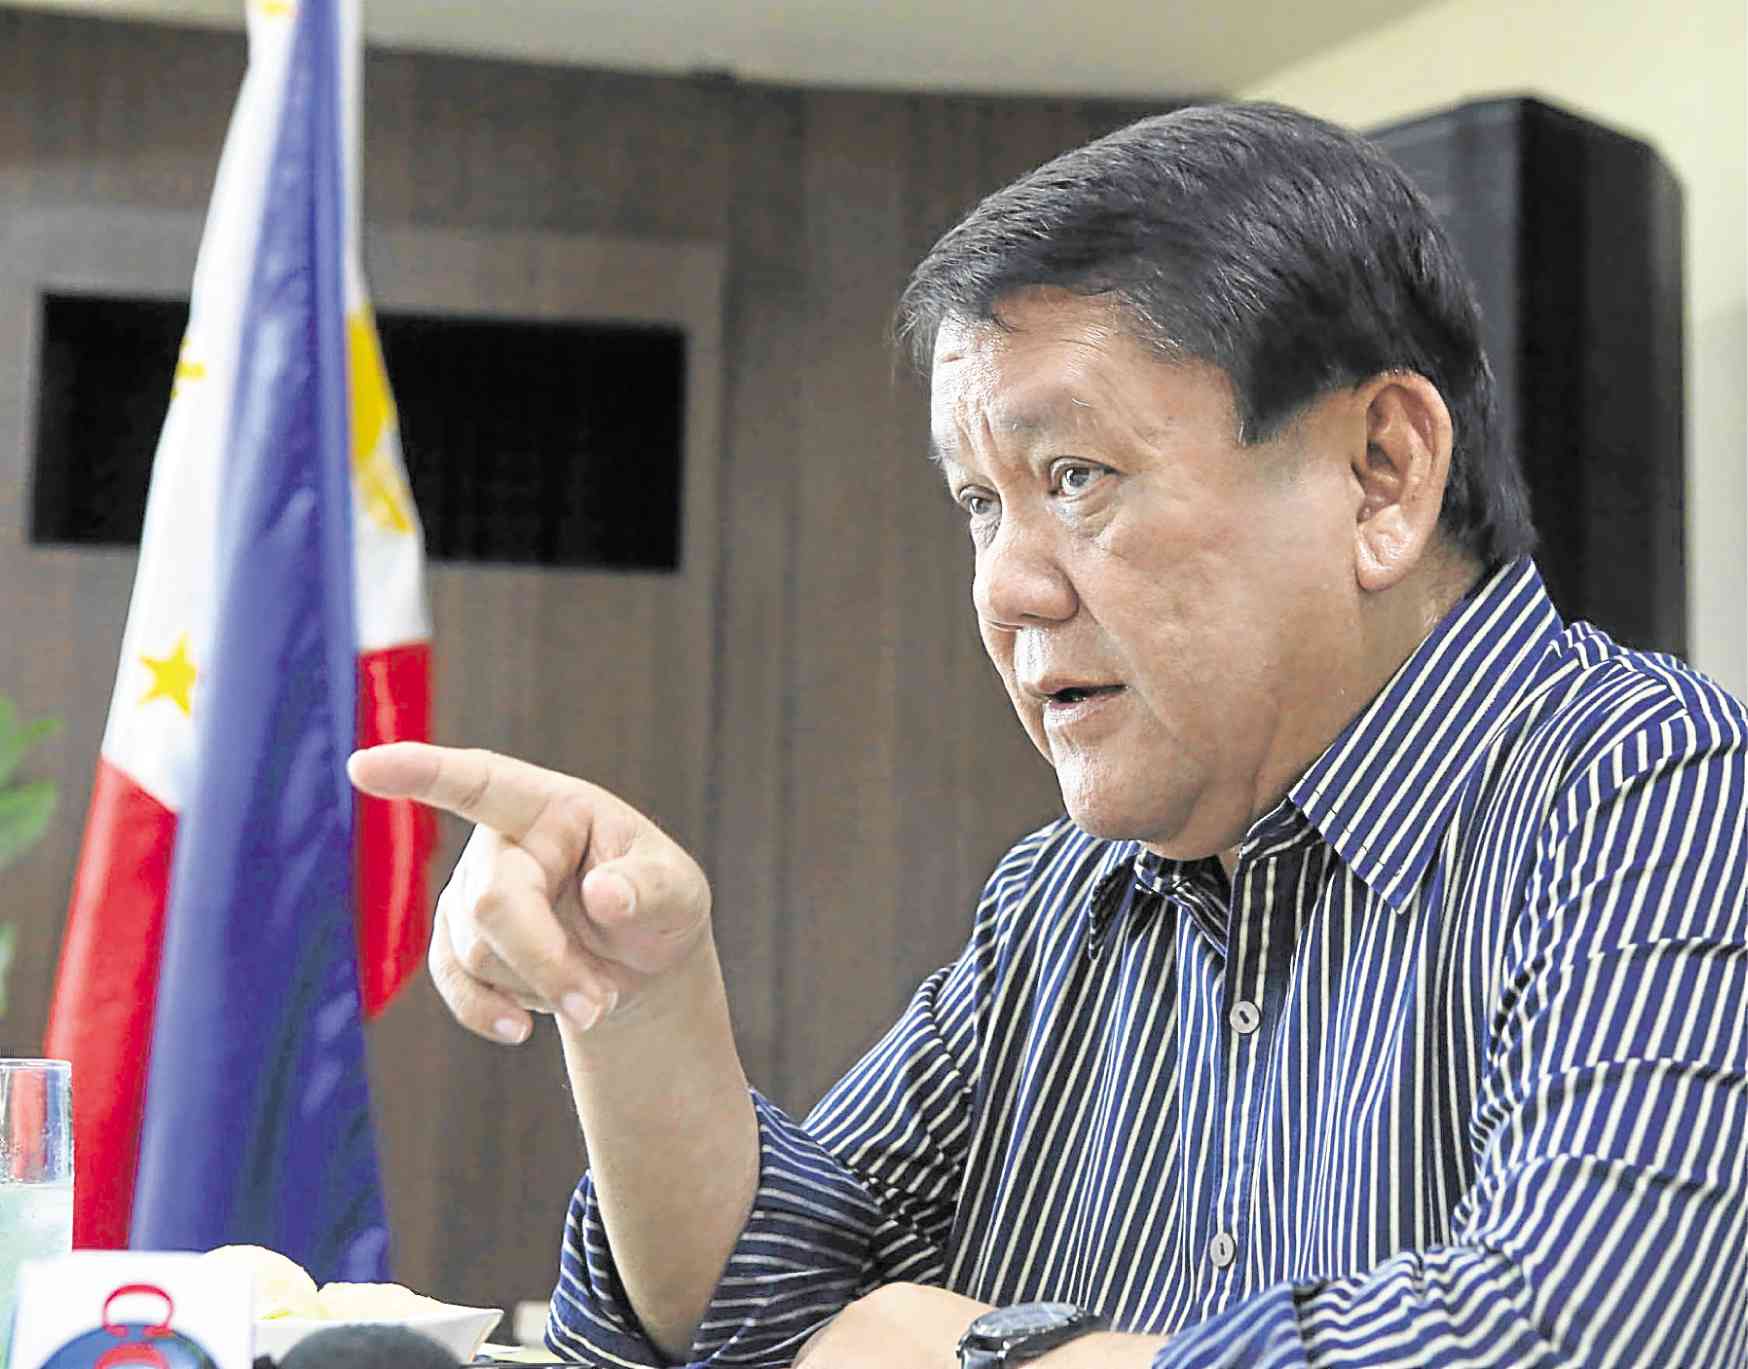 Tomas Osmeña to face raps for taking with him office fixtures, says lawyer